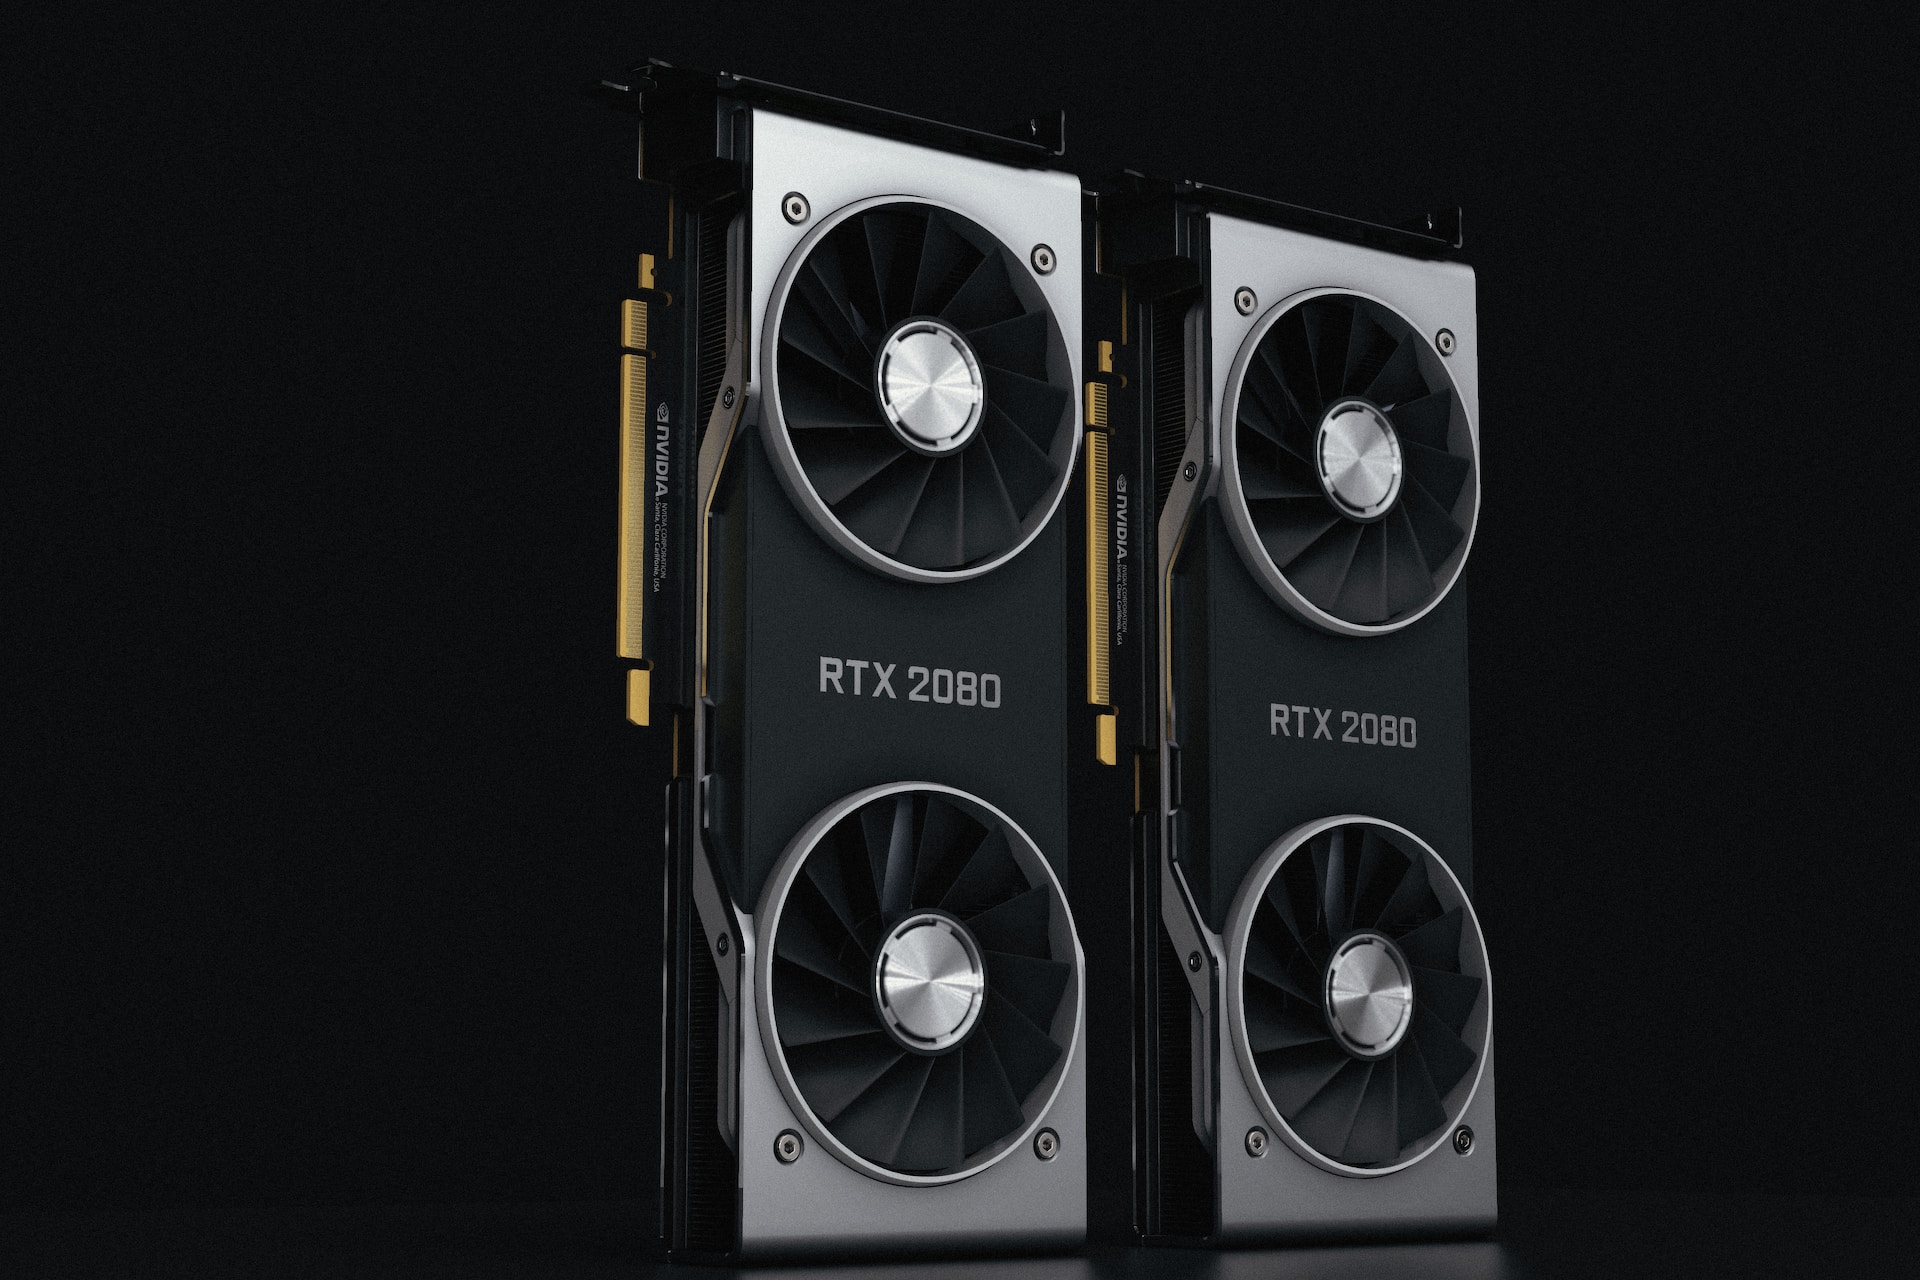 A pair of black RTX 2080 NVIDIA graphics card